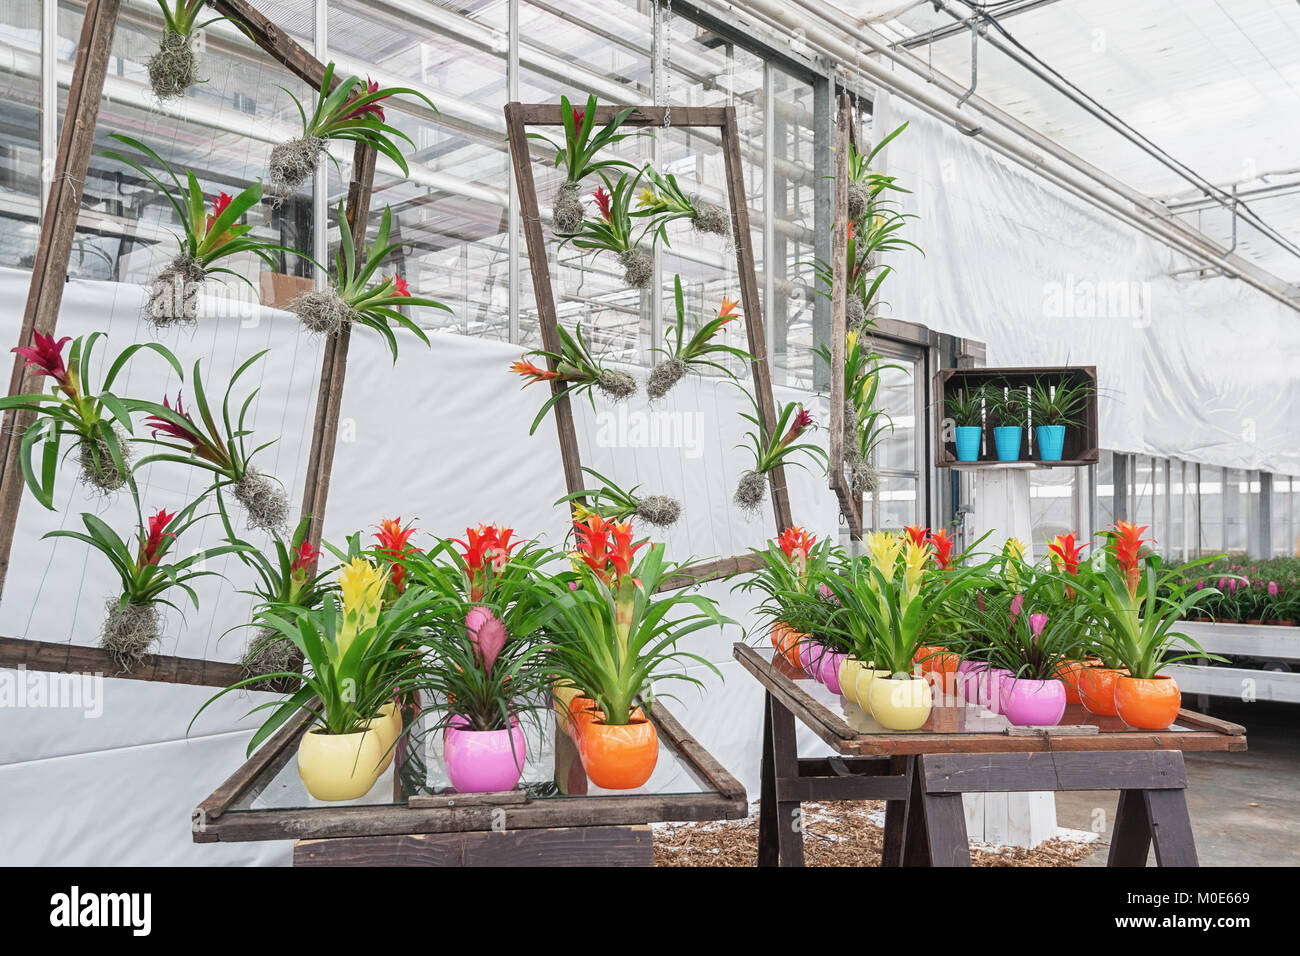 Colorful flower pots filled with colorful bromelias in a greenhouse in the Netherlands Stock Photo